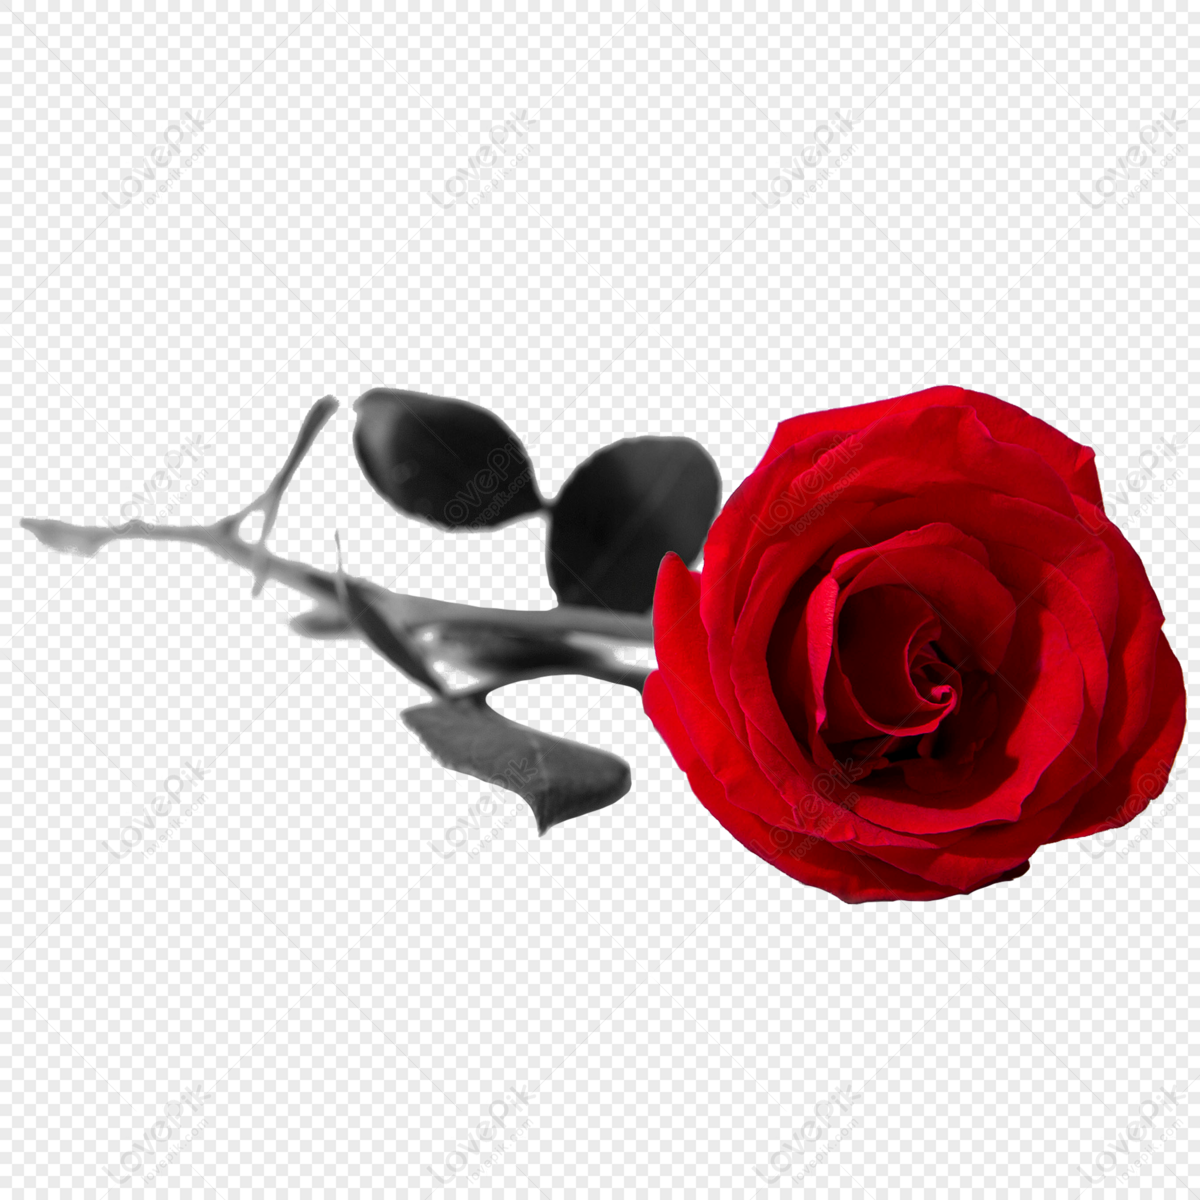 Rose Flower Element PNG Free Download And Clipart Image For Free ...